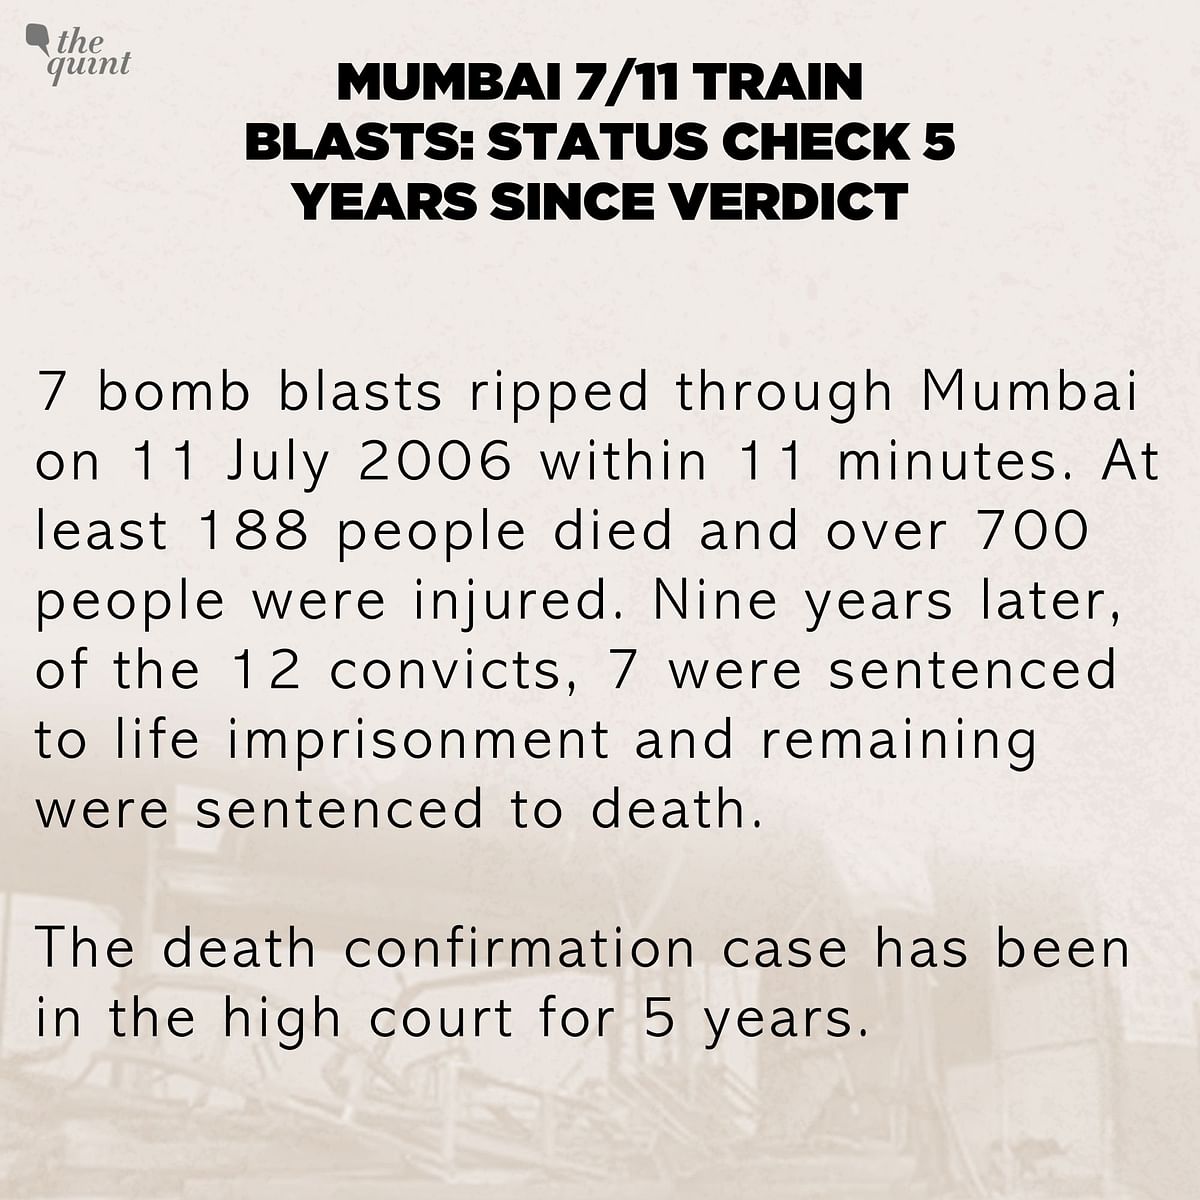 The Quint speaks to lawyers & kin of convicts, to track why it has taken 5 years for hearings to begin in Bombay HC.